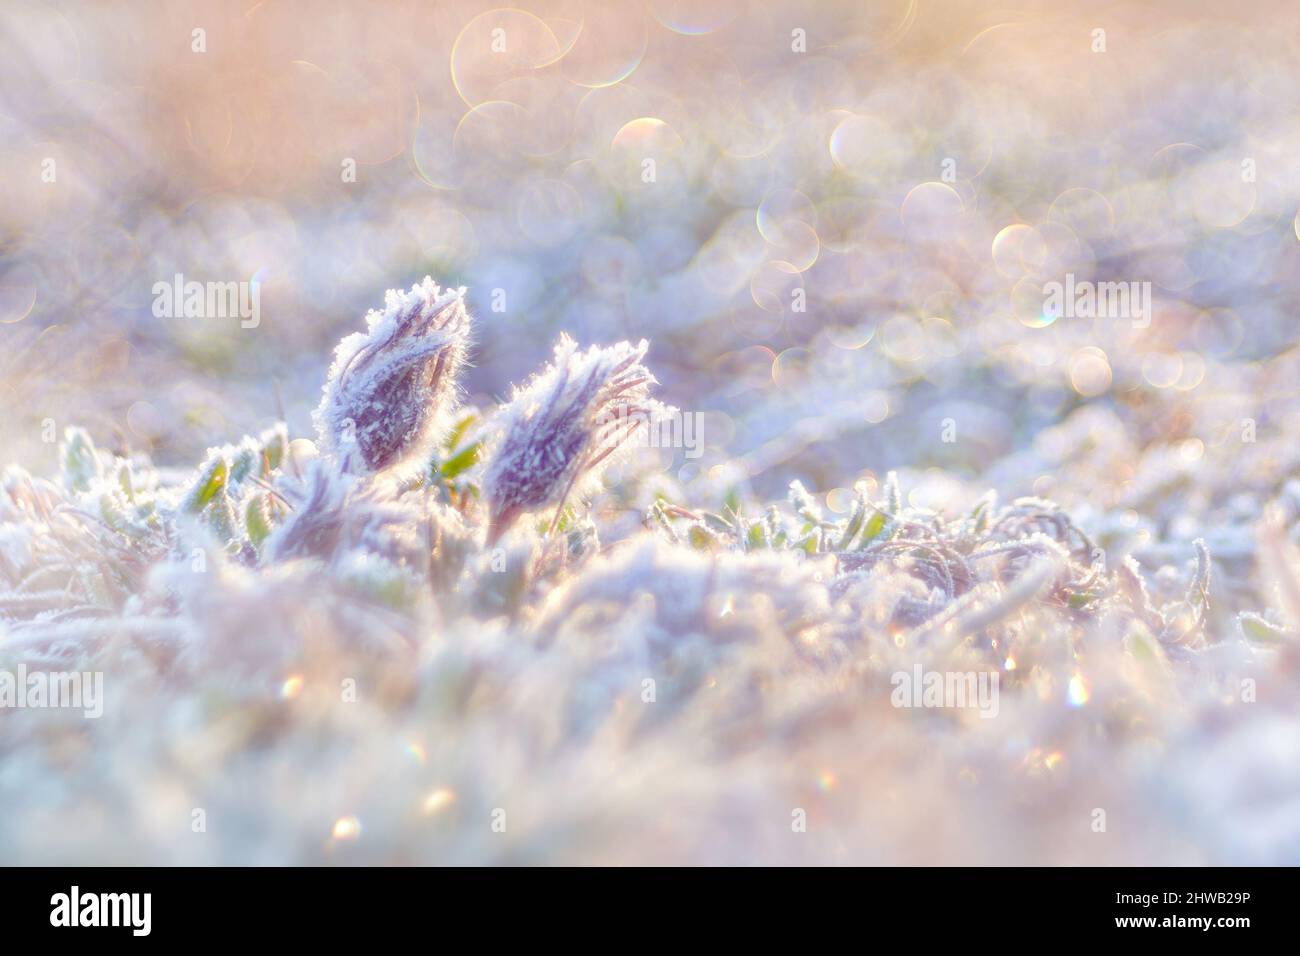 Pulsatilla pratensis subsp. bohemica, small pasque flower genus Pulsatilla, native to central and eastern Europe. Frozen rime and first morning sunris Stock Photo